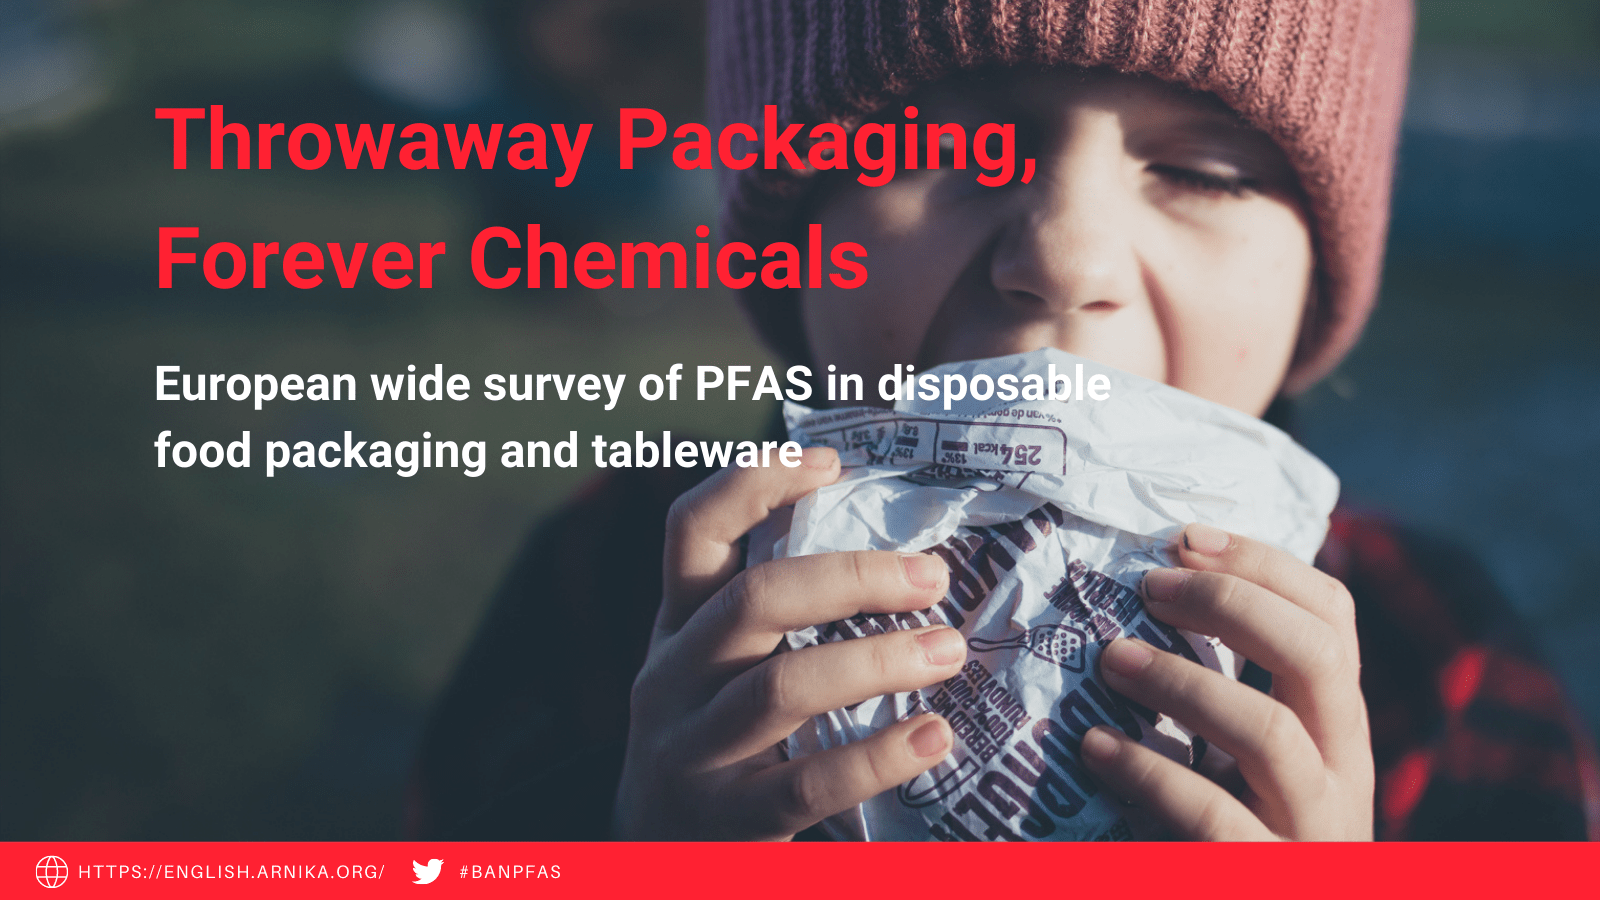 ‘Forever chemicals’ widespread in disposable food packaging from popular fast-food chains across Europe, new study shows